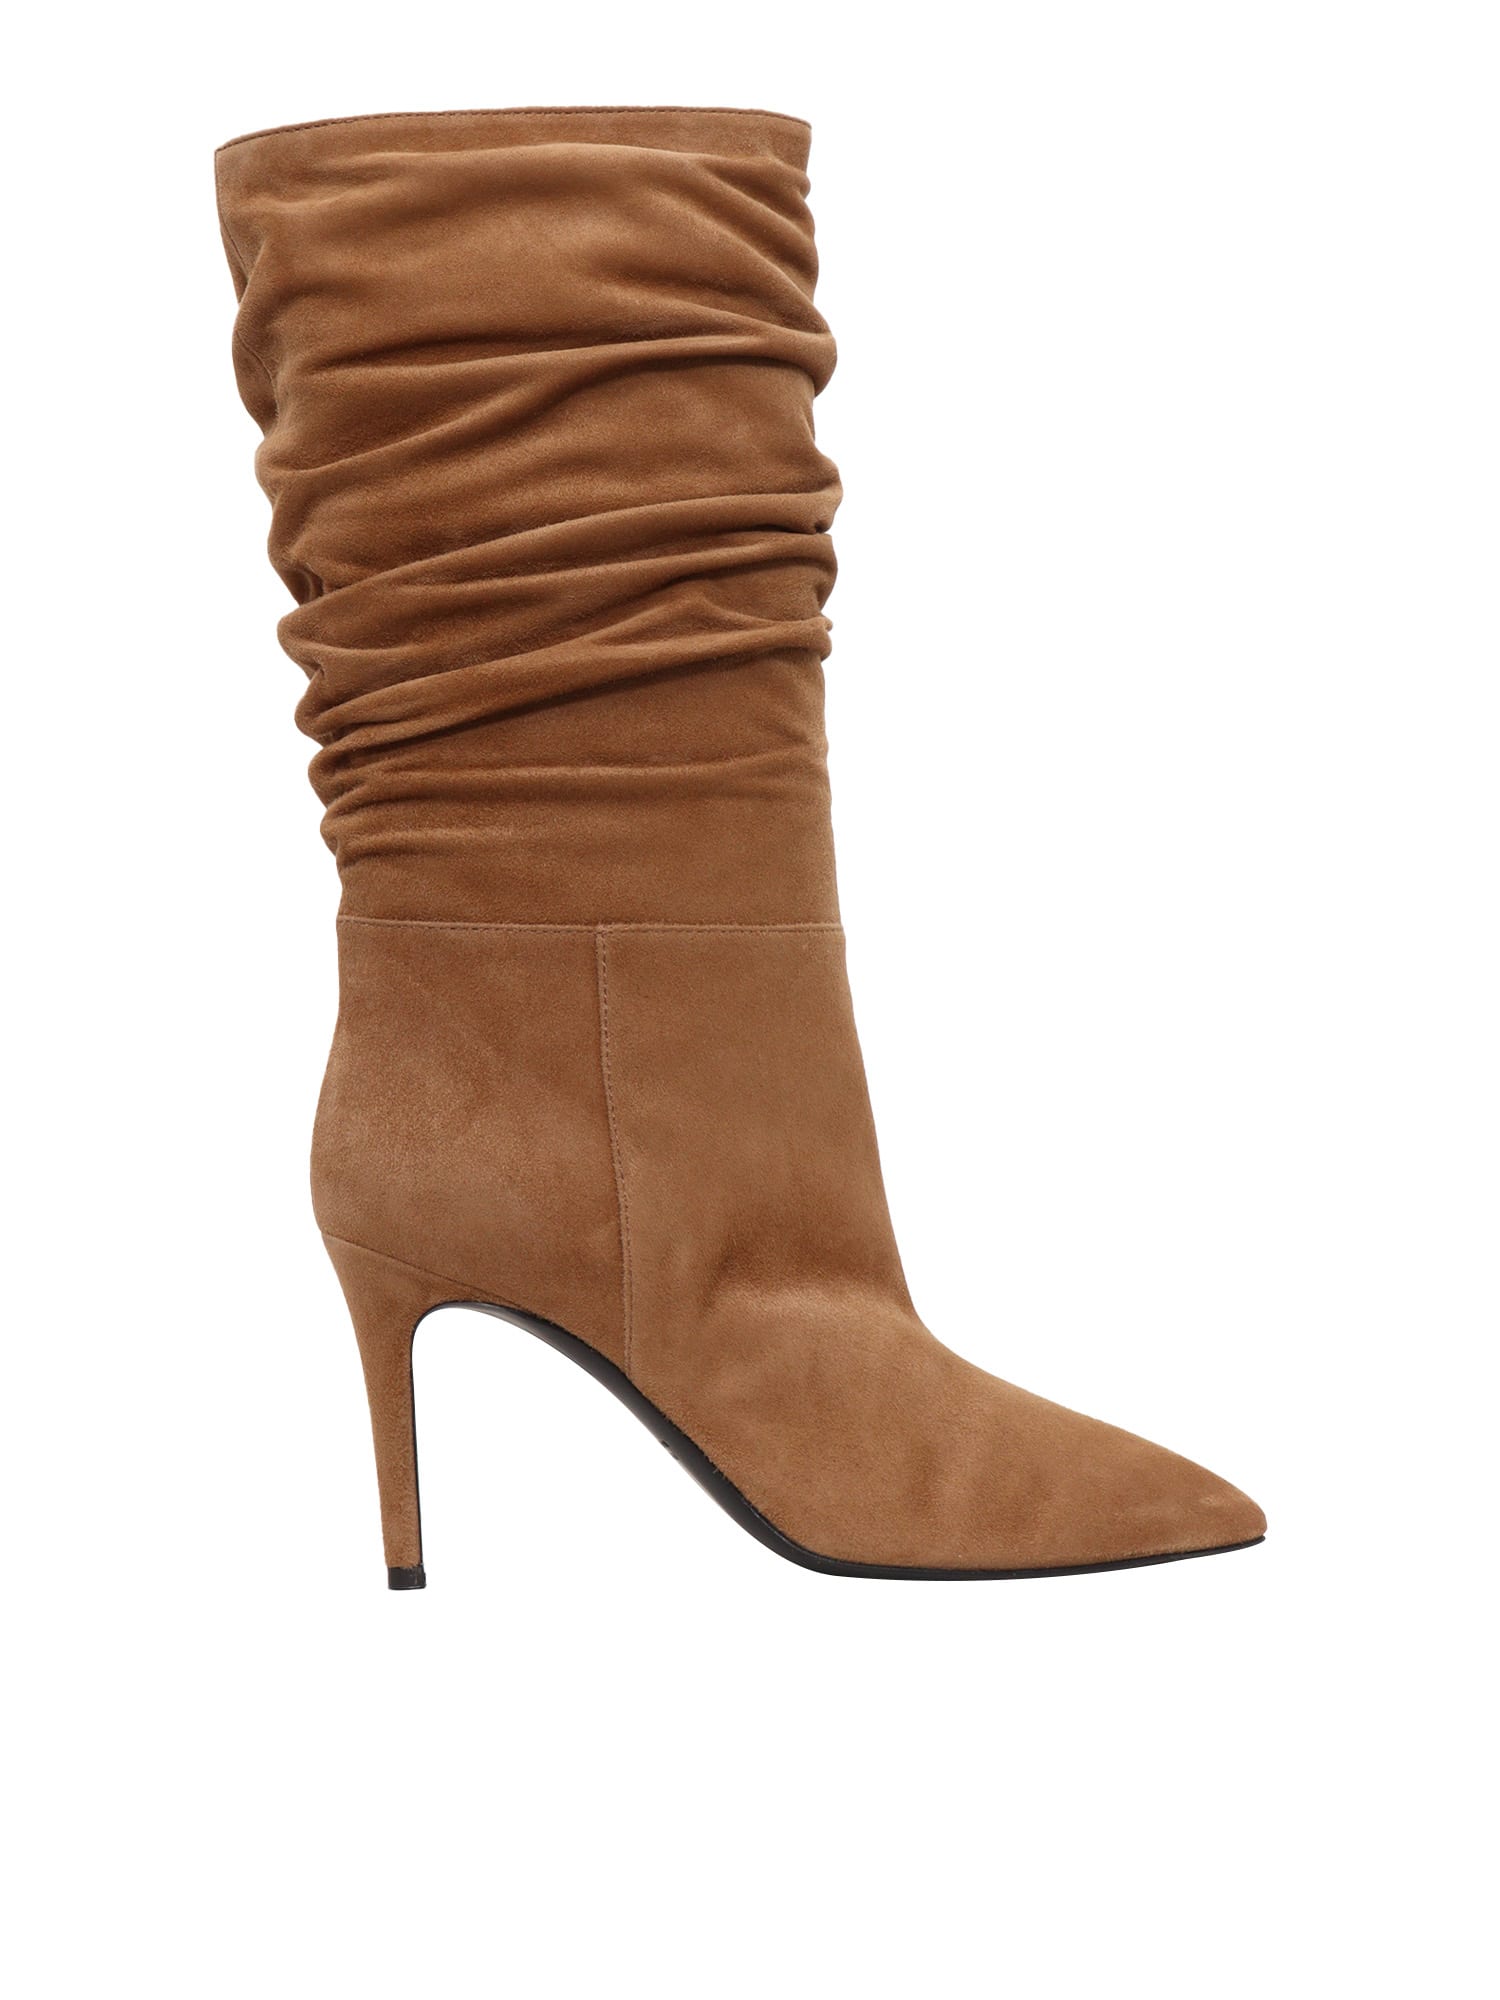 Shop Via Roma 15 Curled Brown Boot